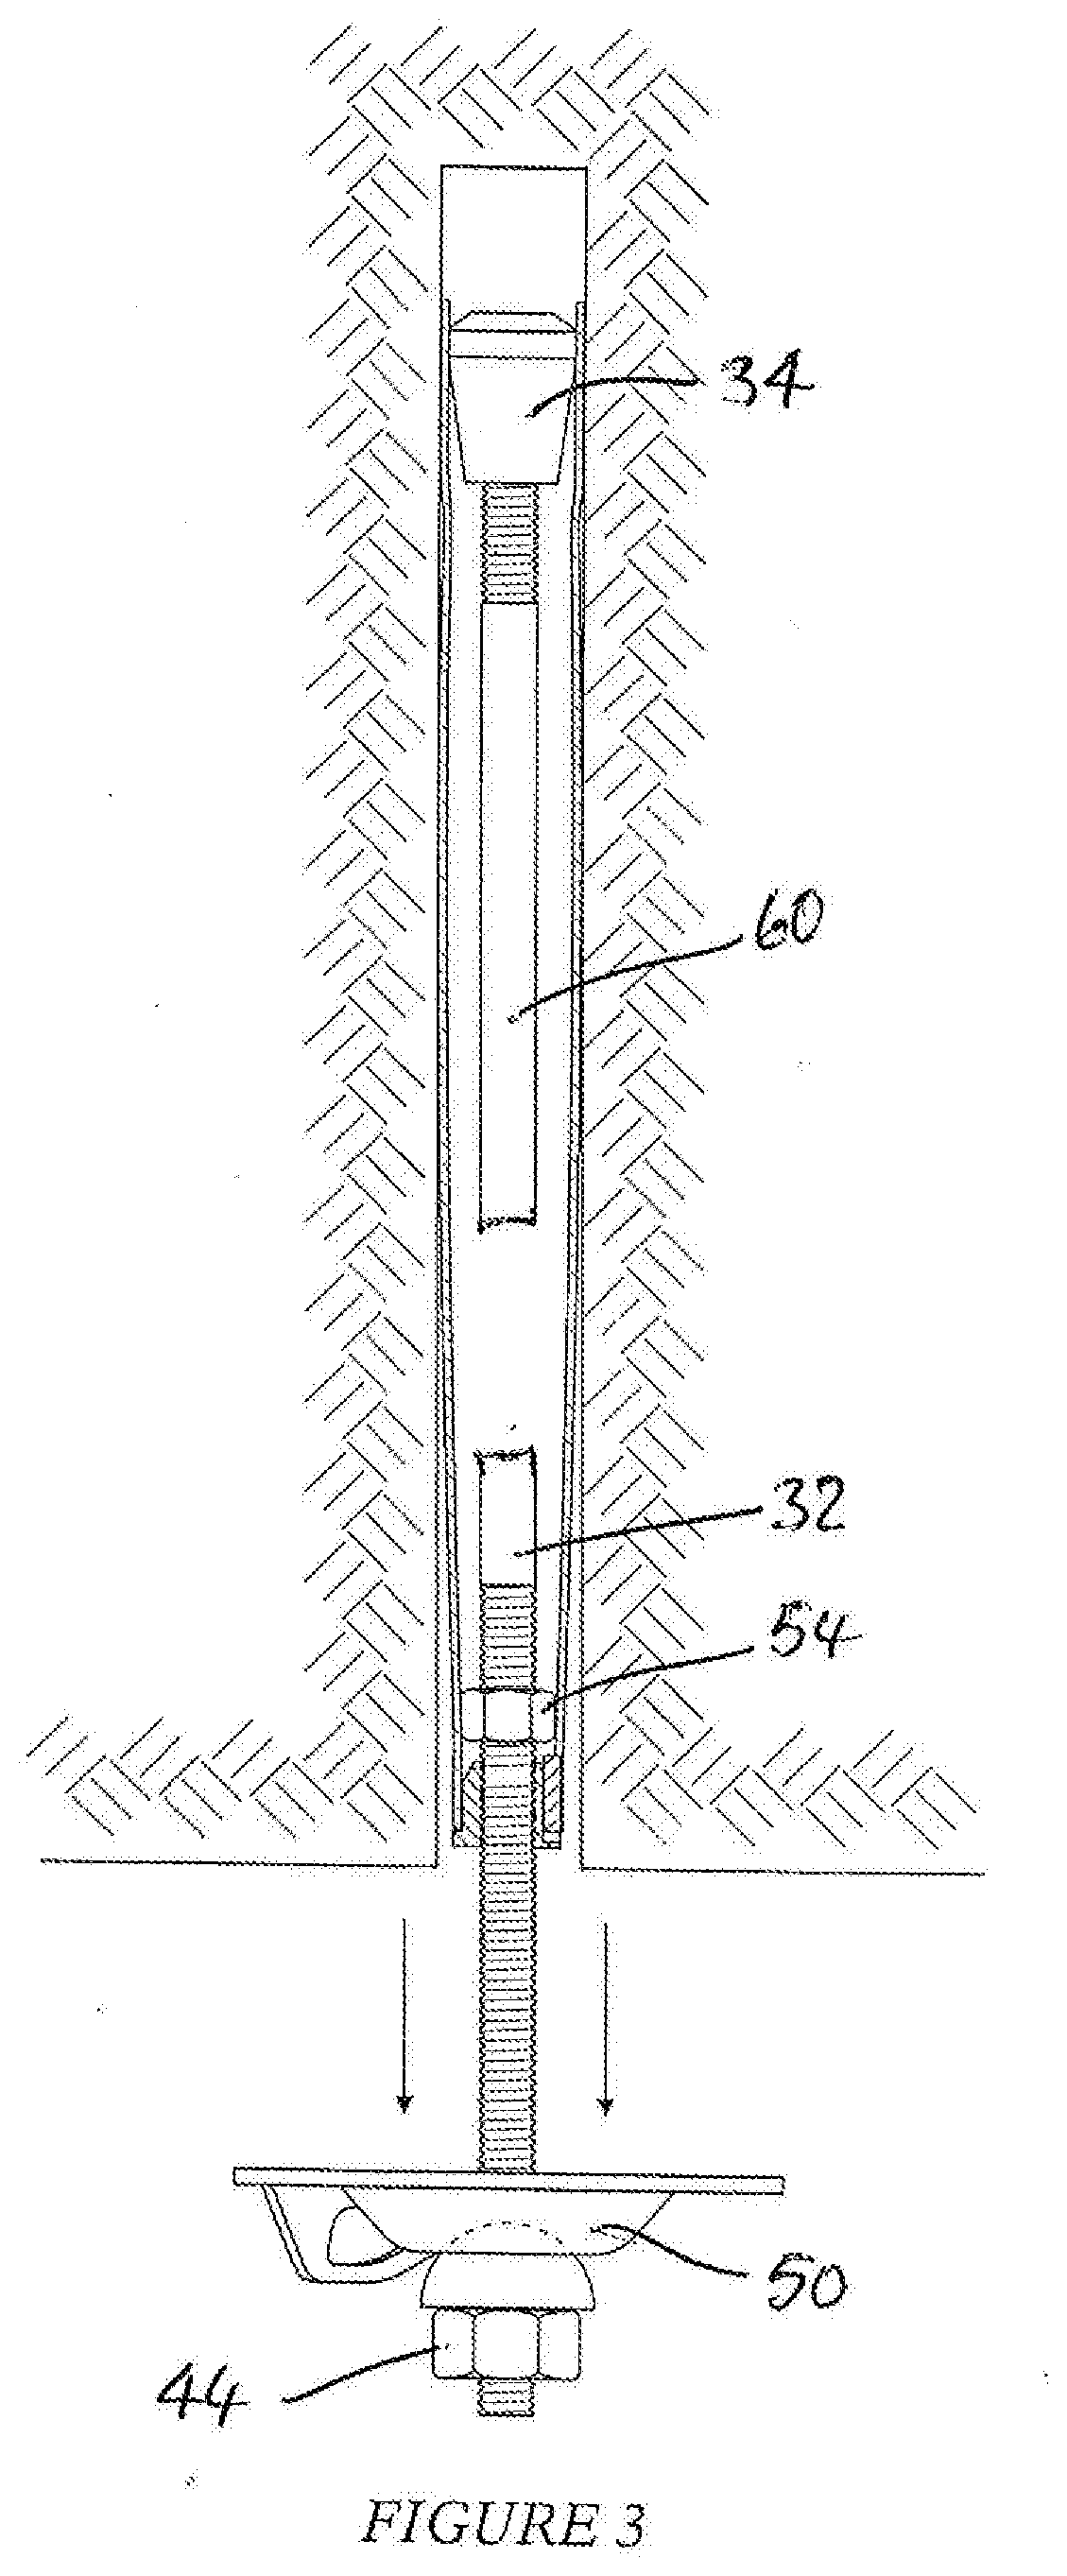 Rock bolt assembly with failure arrestor